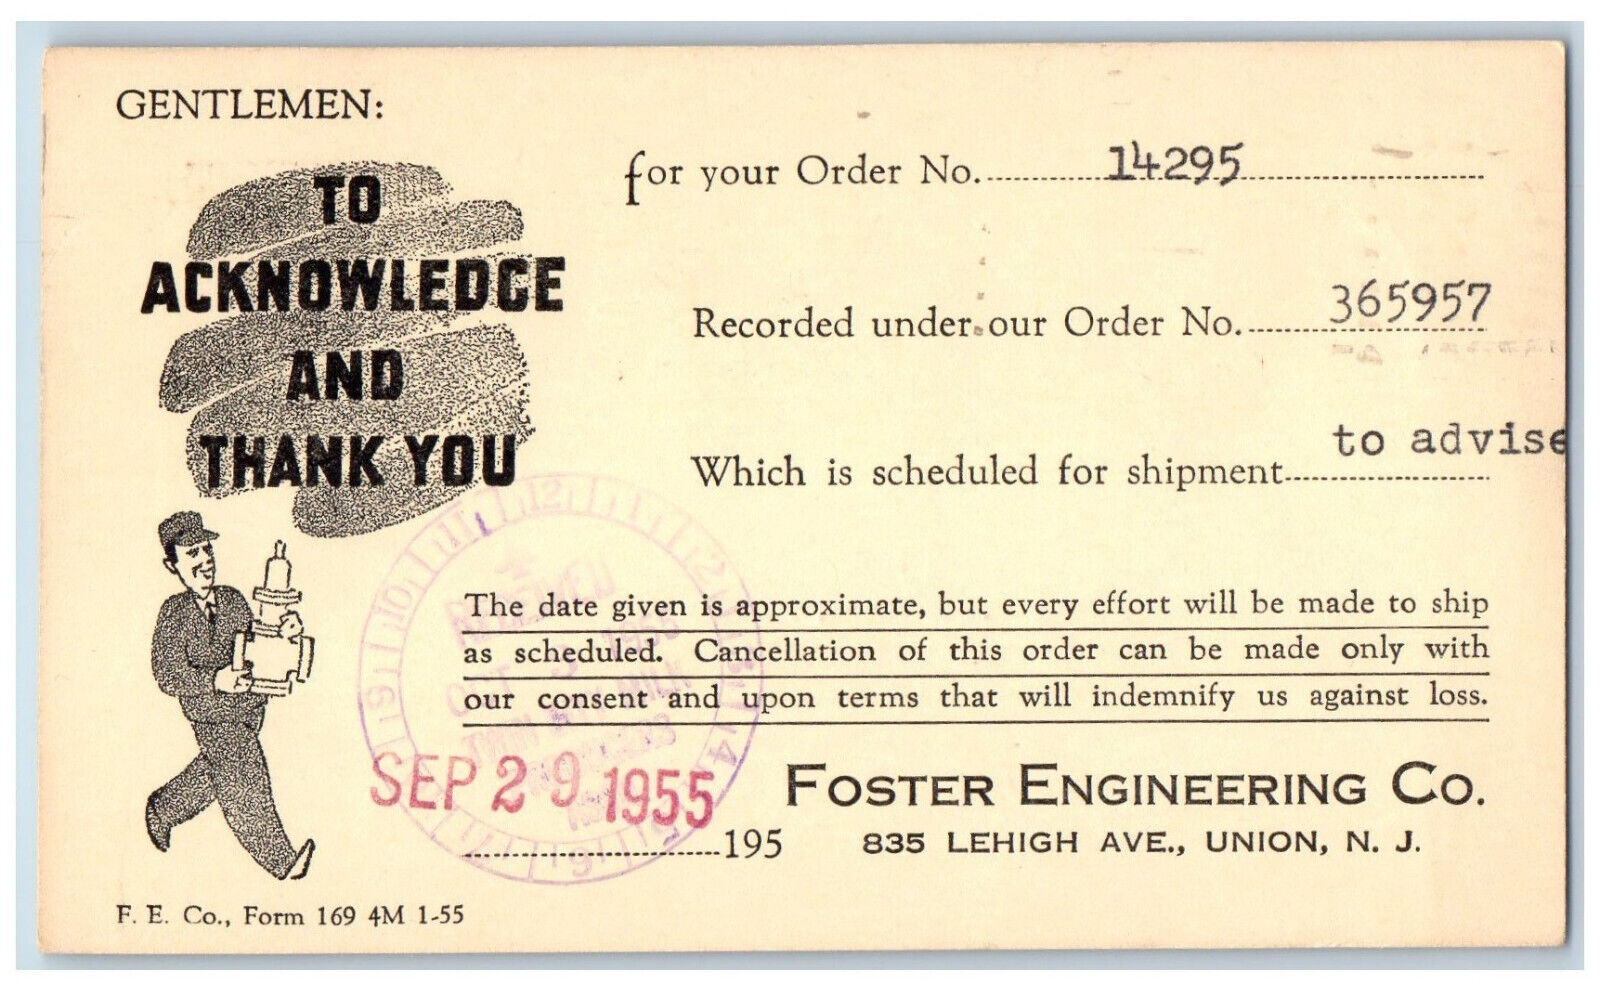 Union New Jersey NJ Postal Card Foster Engineering Co. 1955 Vintage Posted